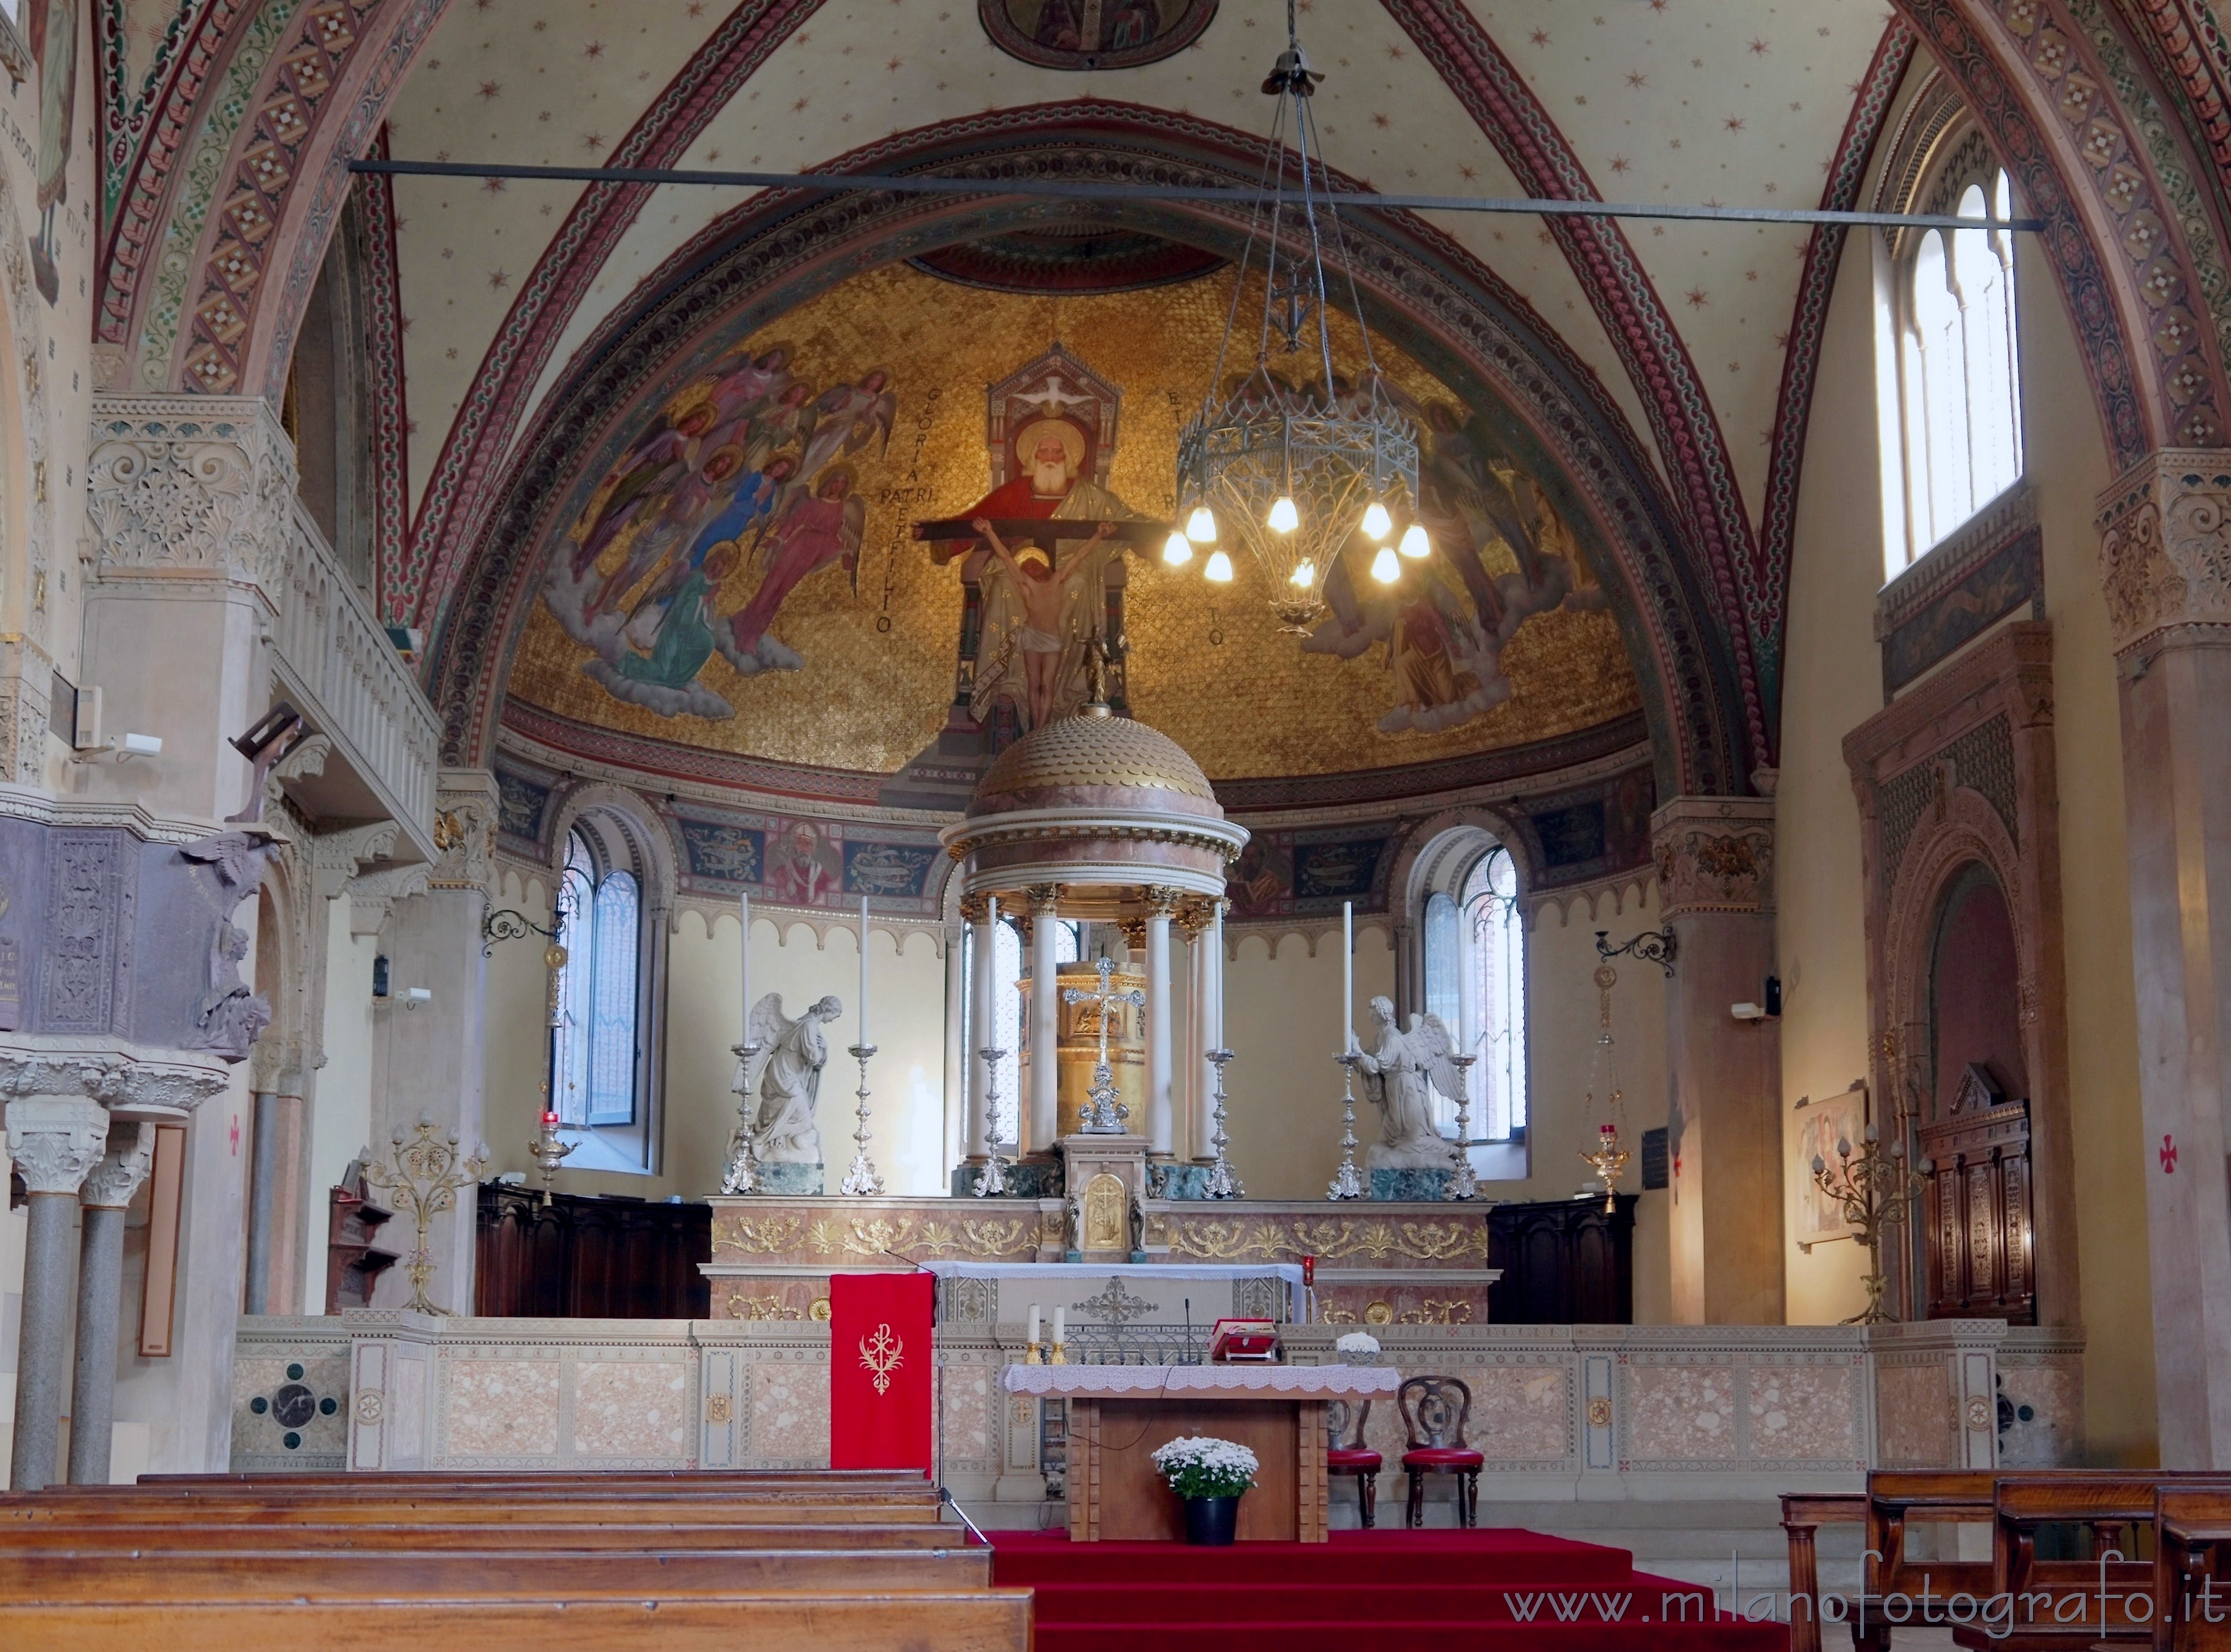 Milan (Italy): Altar and apse of the Basilica of San Calimero - Milan (Italy)